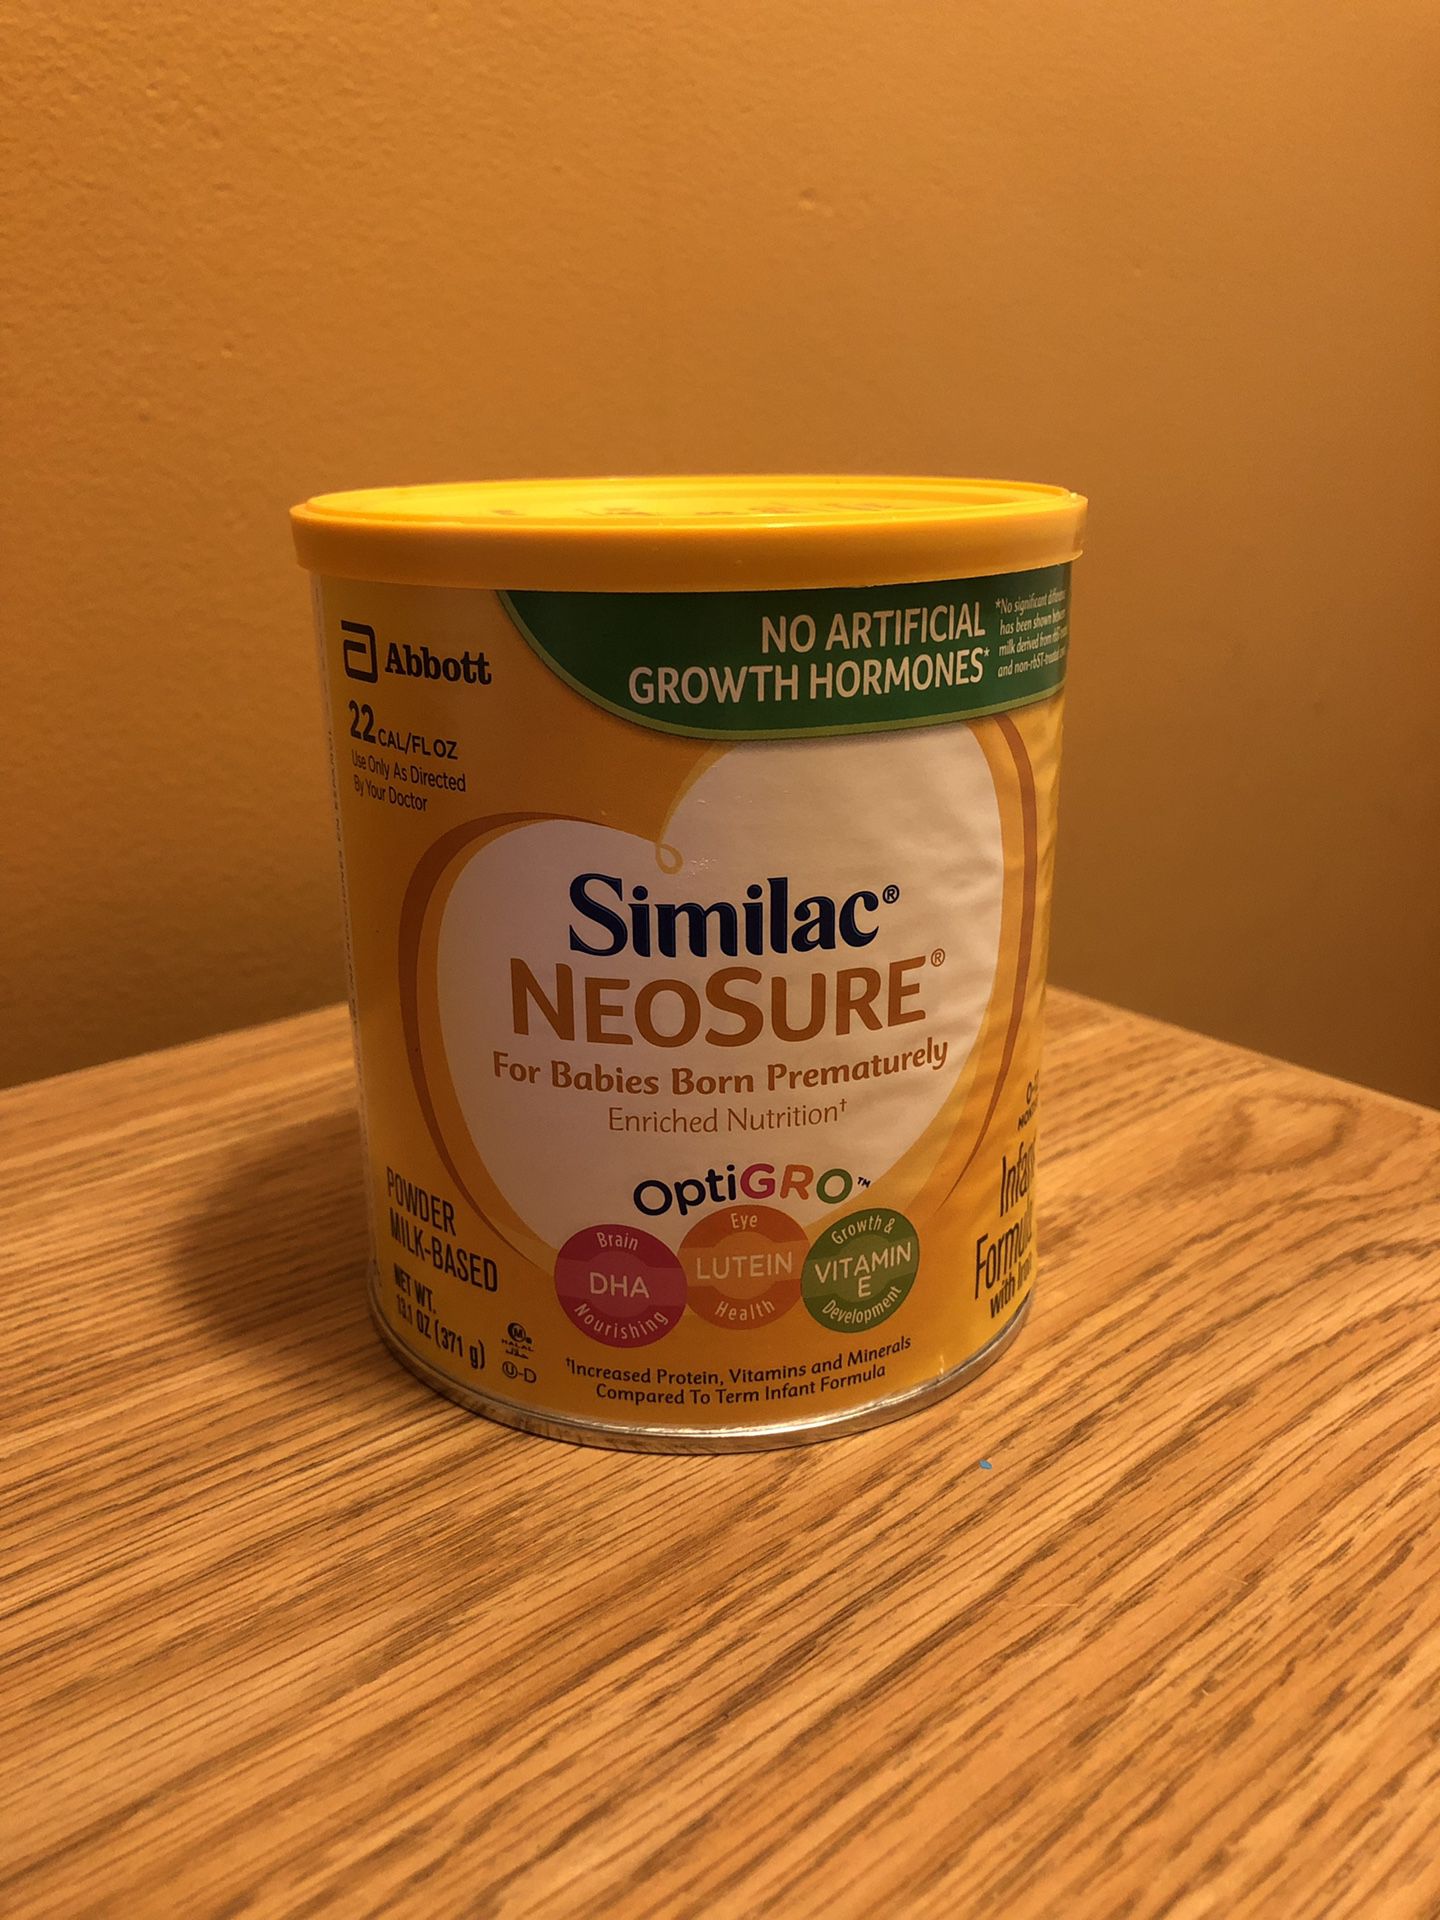 5 CANS OF SIMILAC NEOSURE